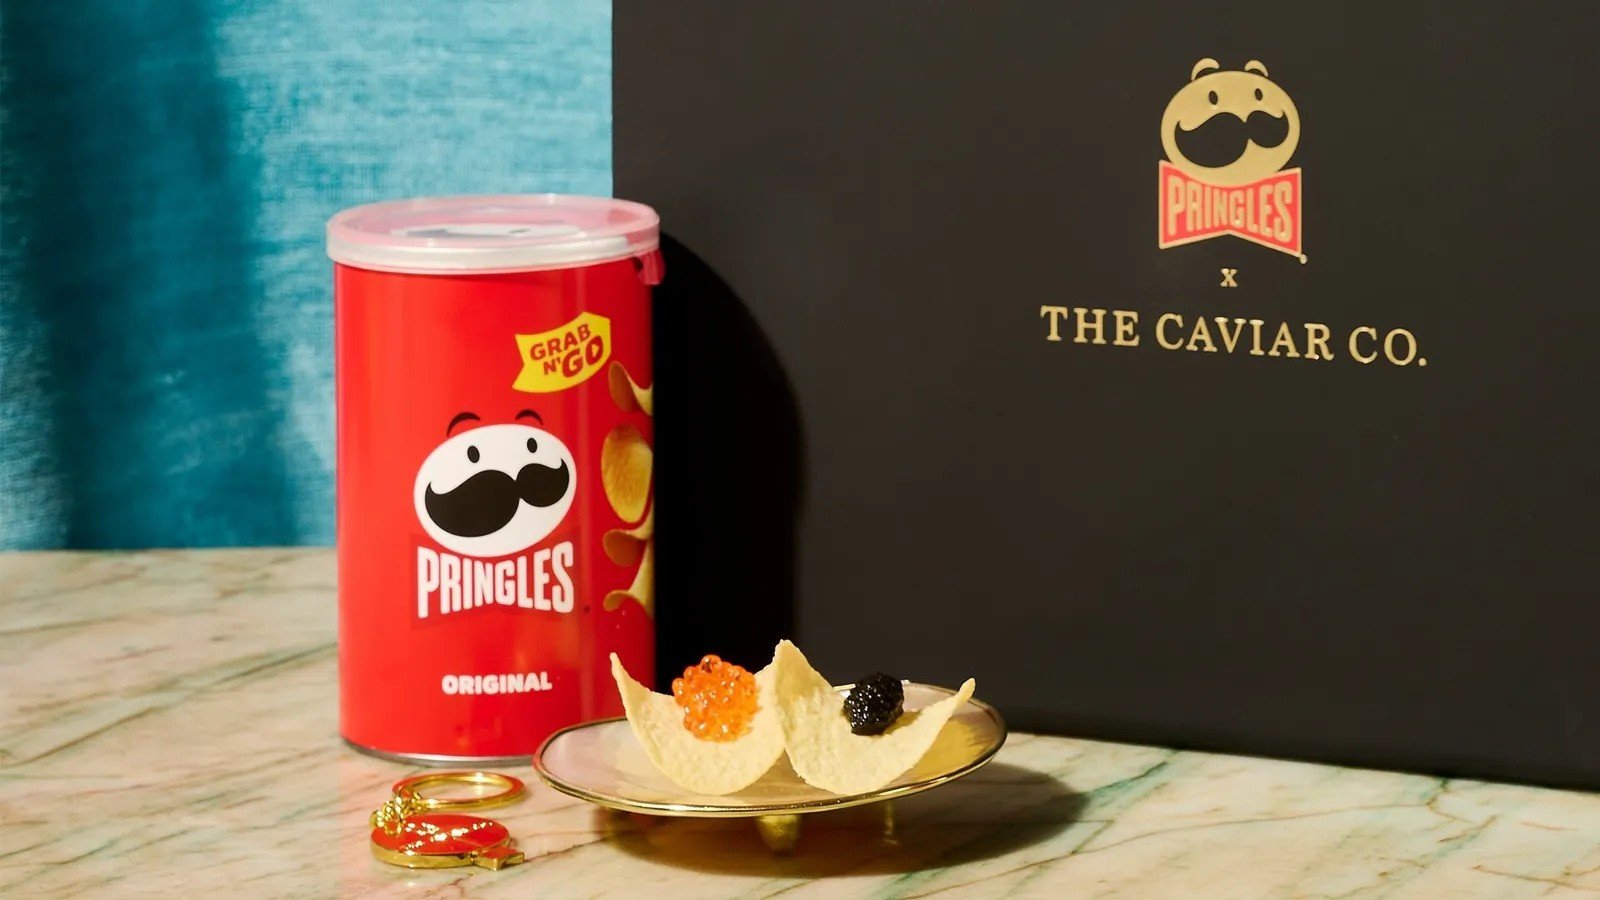 Pringles and The Caviar Co pairing collab